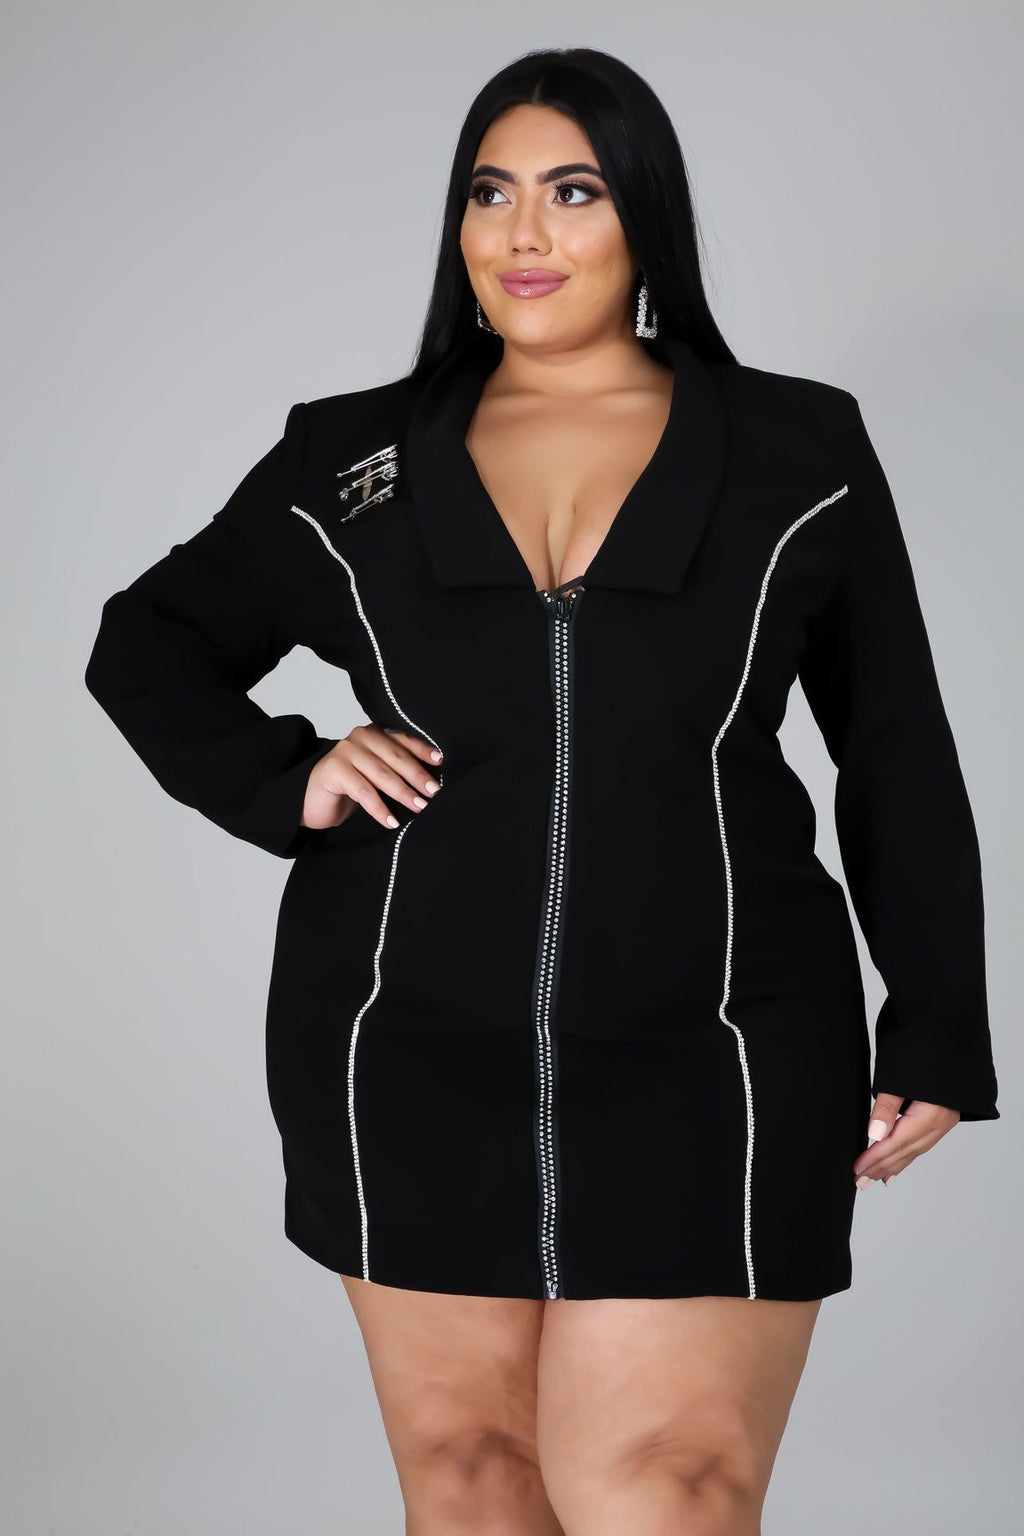 Can You Handle This Blazer Dress